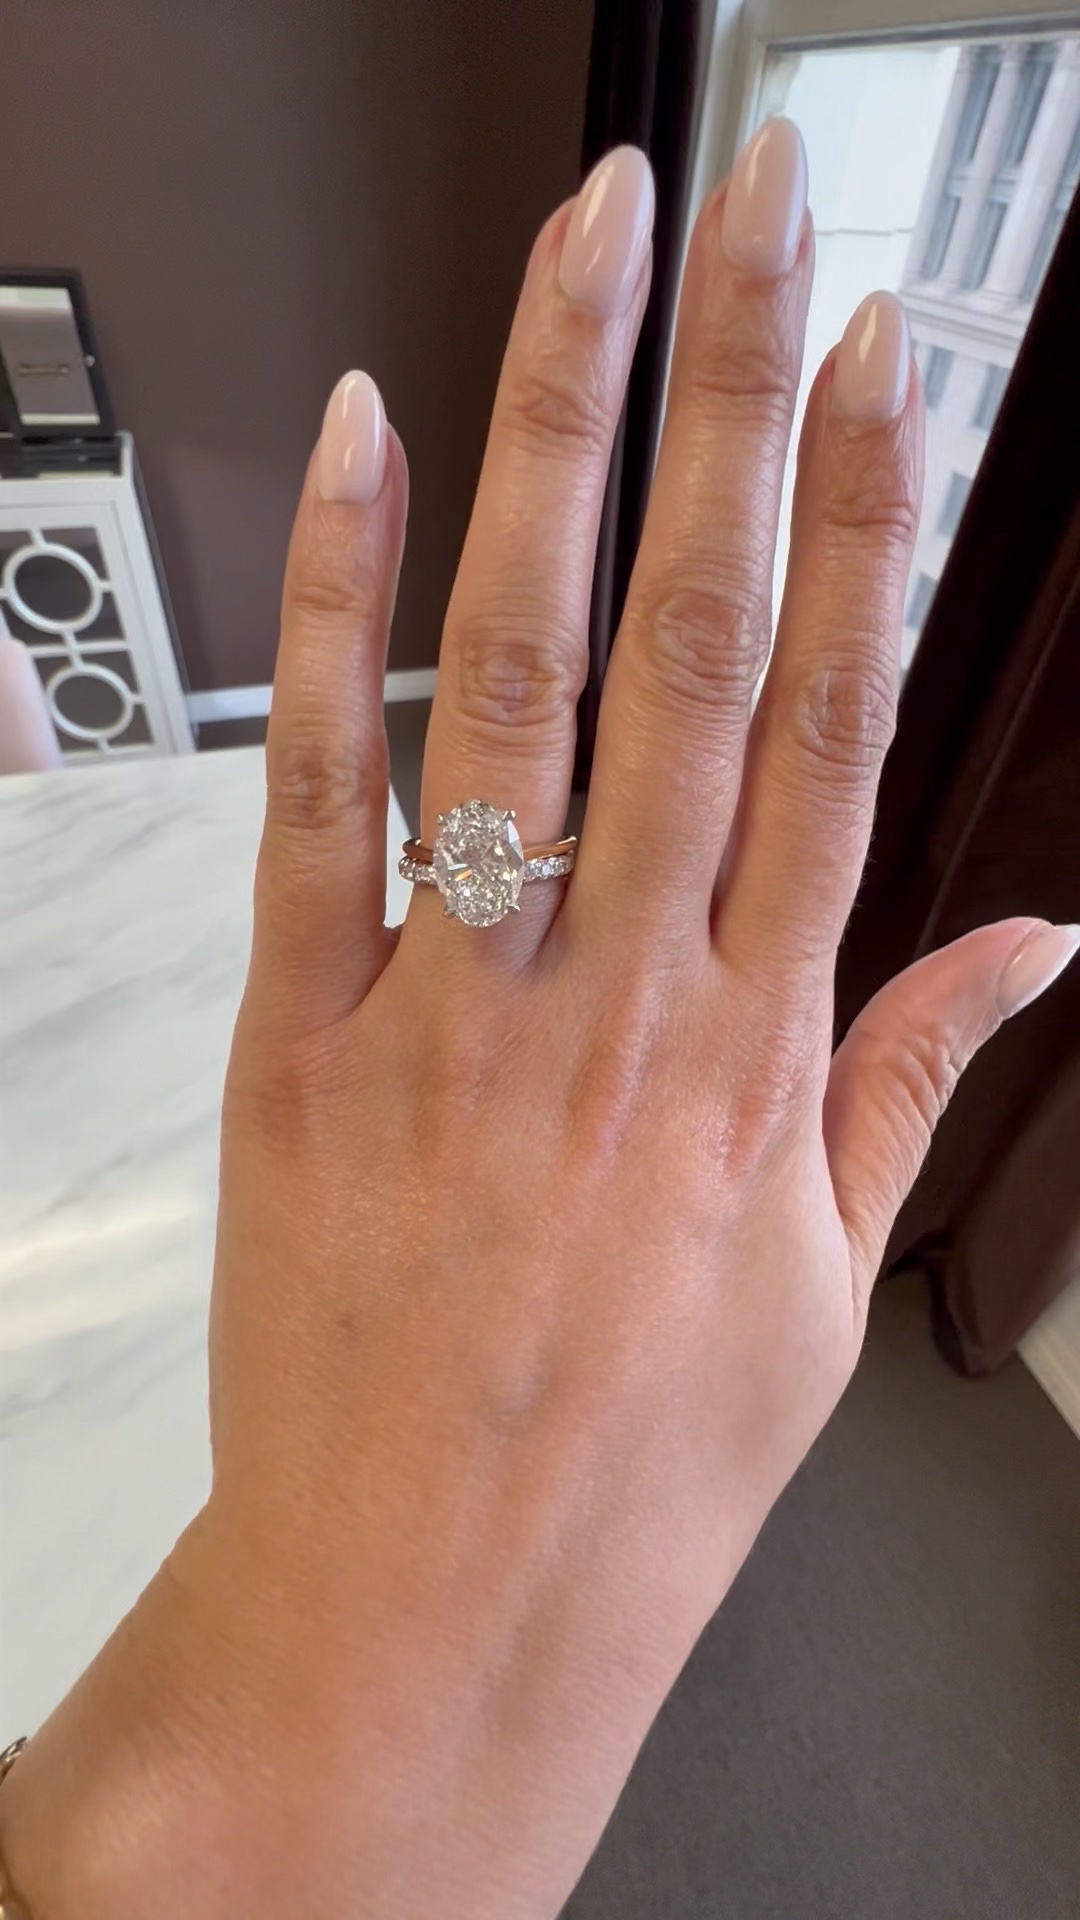 What Is A Bridal Set? How Engagement Rings and Wedding Bands Work